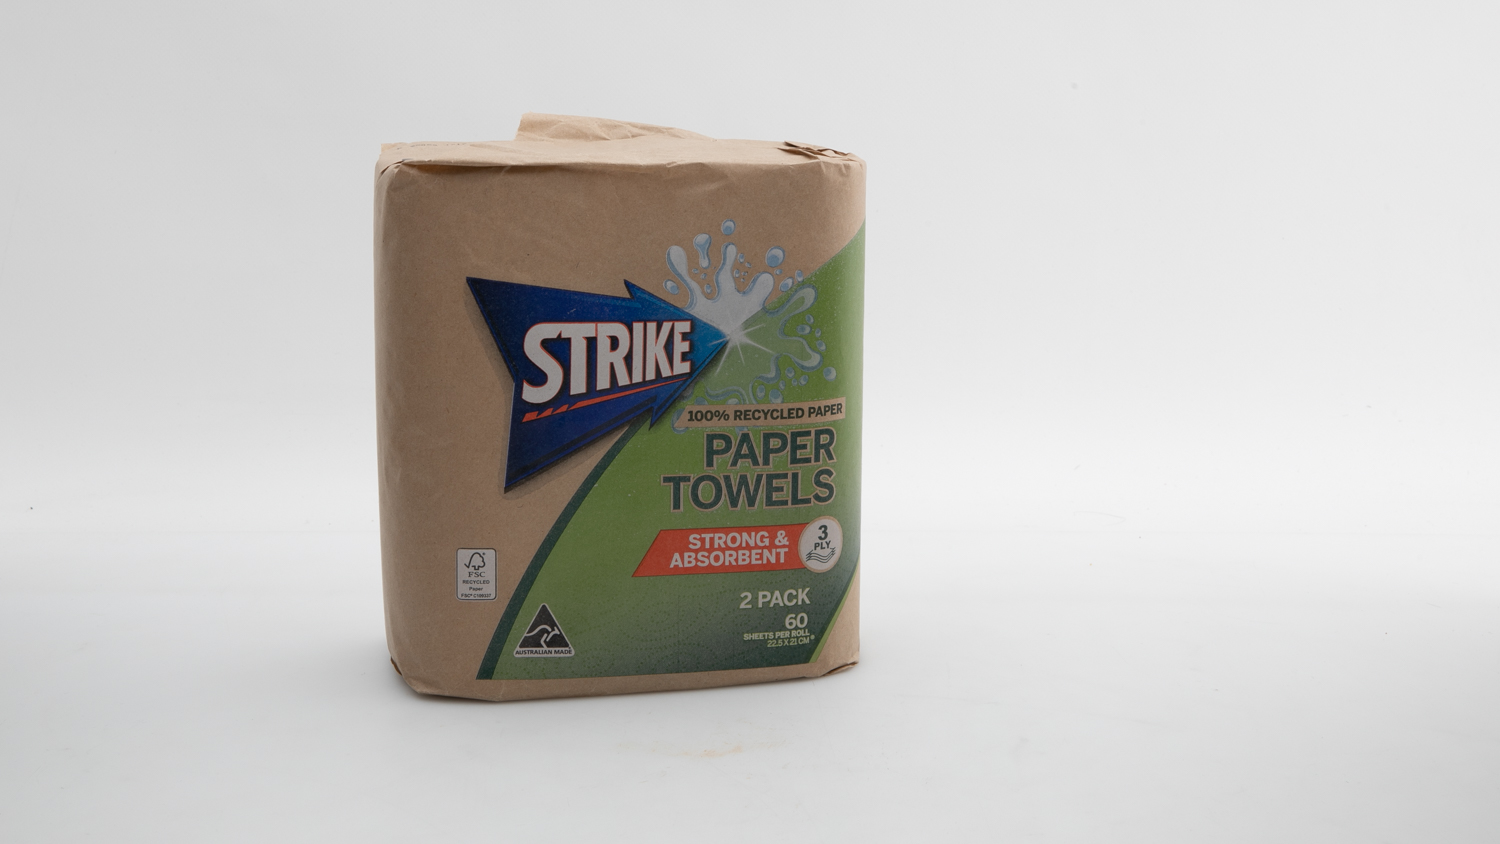 Woolworths Strike 100% Recycled Paper Paper Towels carousel image